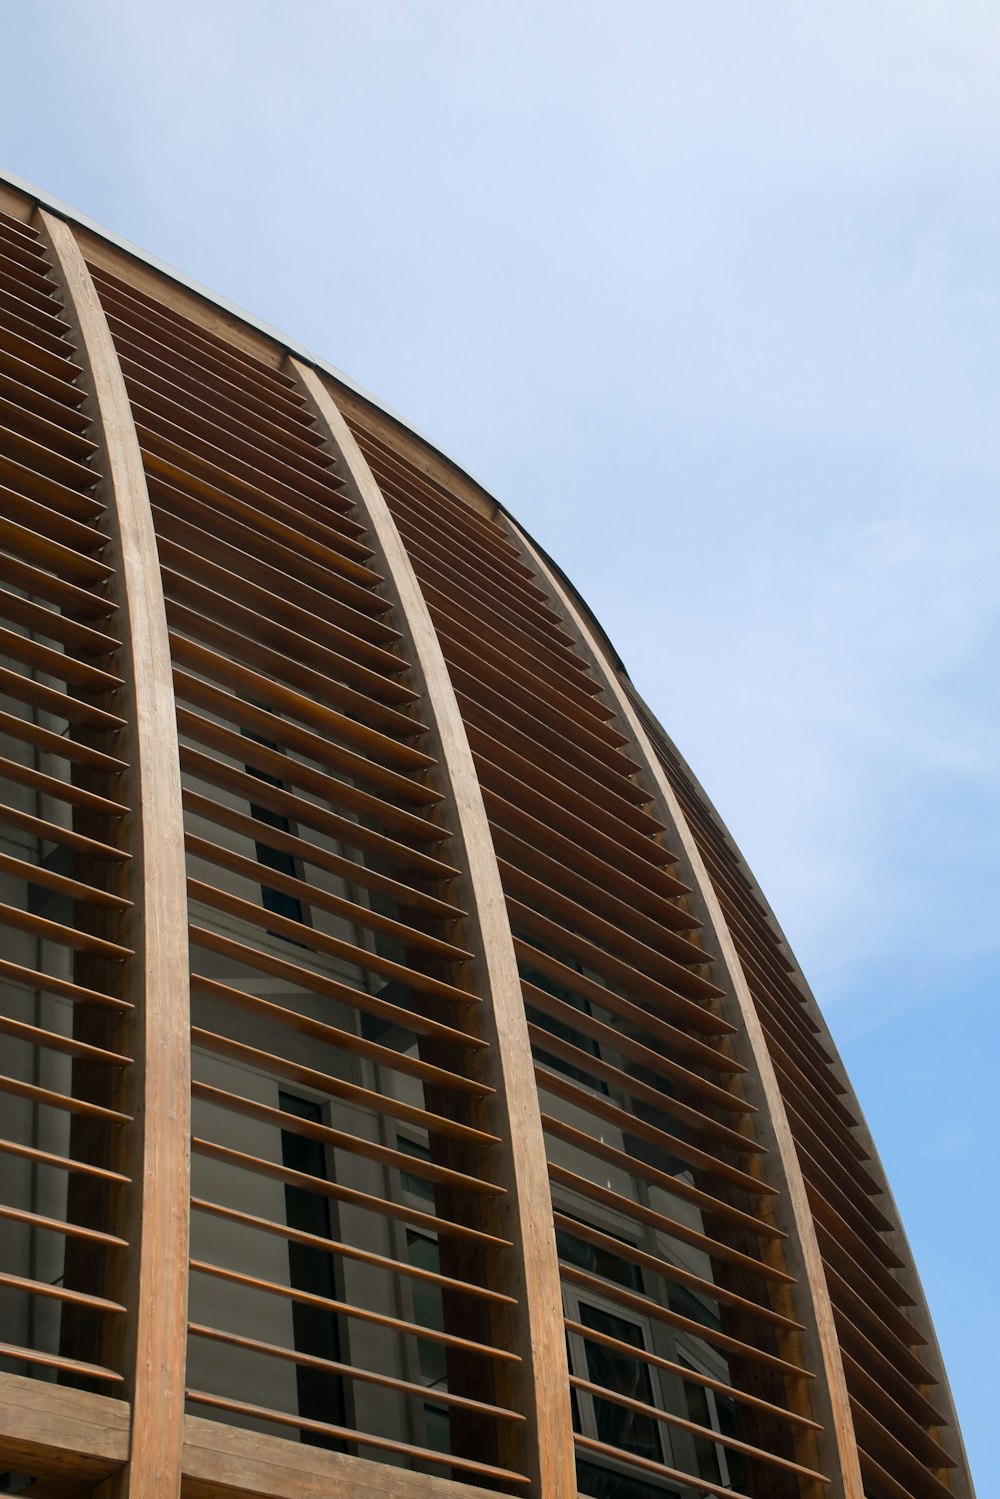 a close up of a building with wooden slats